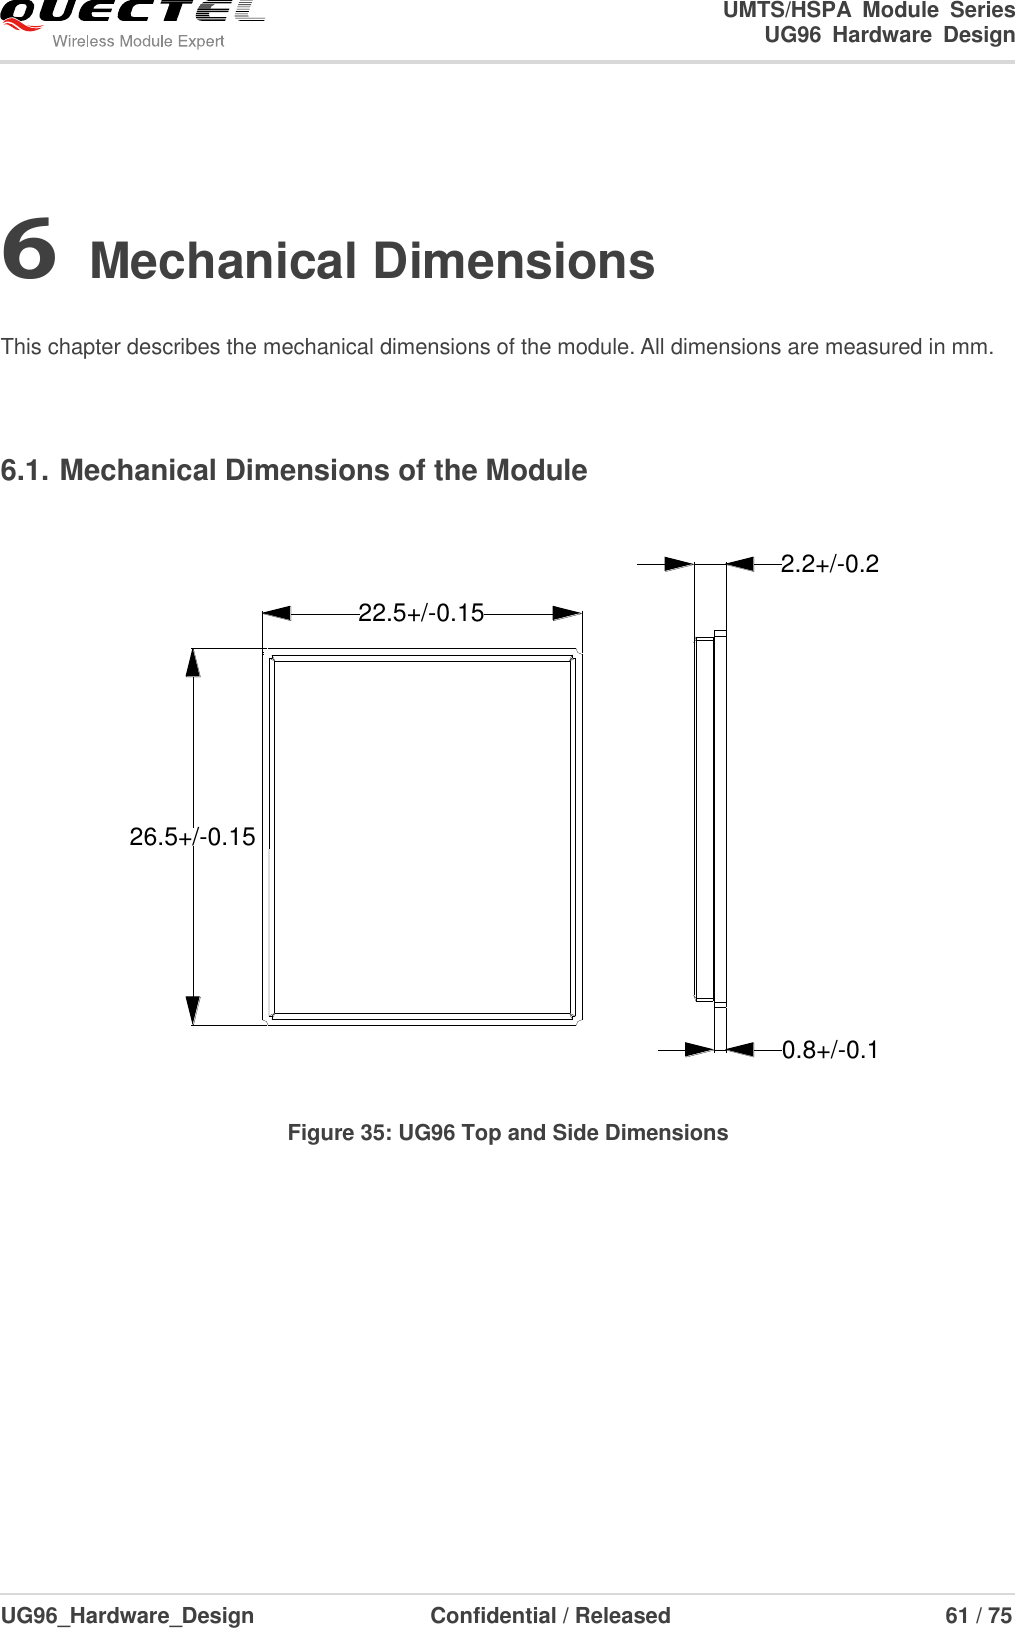                                                                        UMTS/HSPA  Module  Series                                                                 UG96  Hardware  Design  UG96_Hardware_Design                  Confidential / Released                             61 / 75    6 Mechanical Dimensions  This chapter describes the mechanical dimensions of the module. All dimensions are measured in mm.  6.1. Mechanical Dimensions of the Module    22.5+/-0.1526.5+/-0.152.2+/-0.20.8+/-0.1 Figure 35: UG96 Top and Side Dimensions  